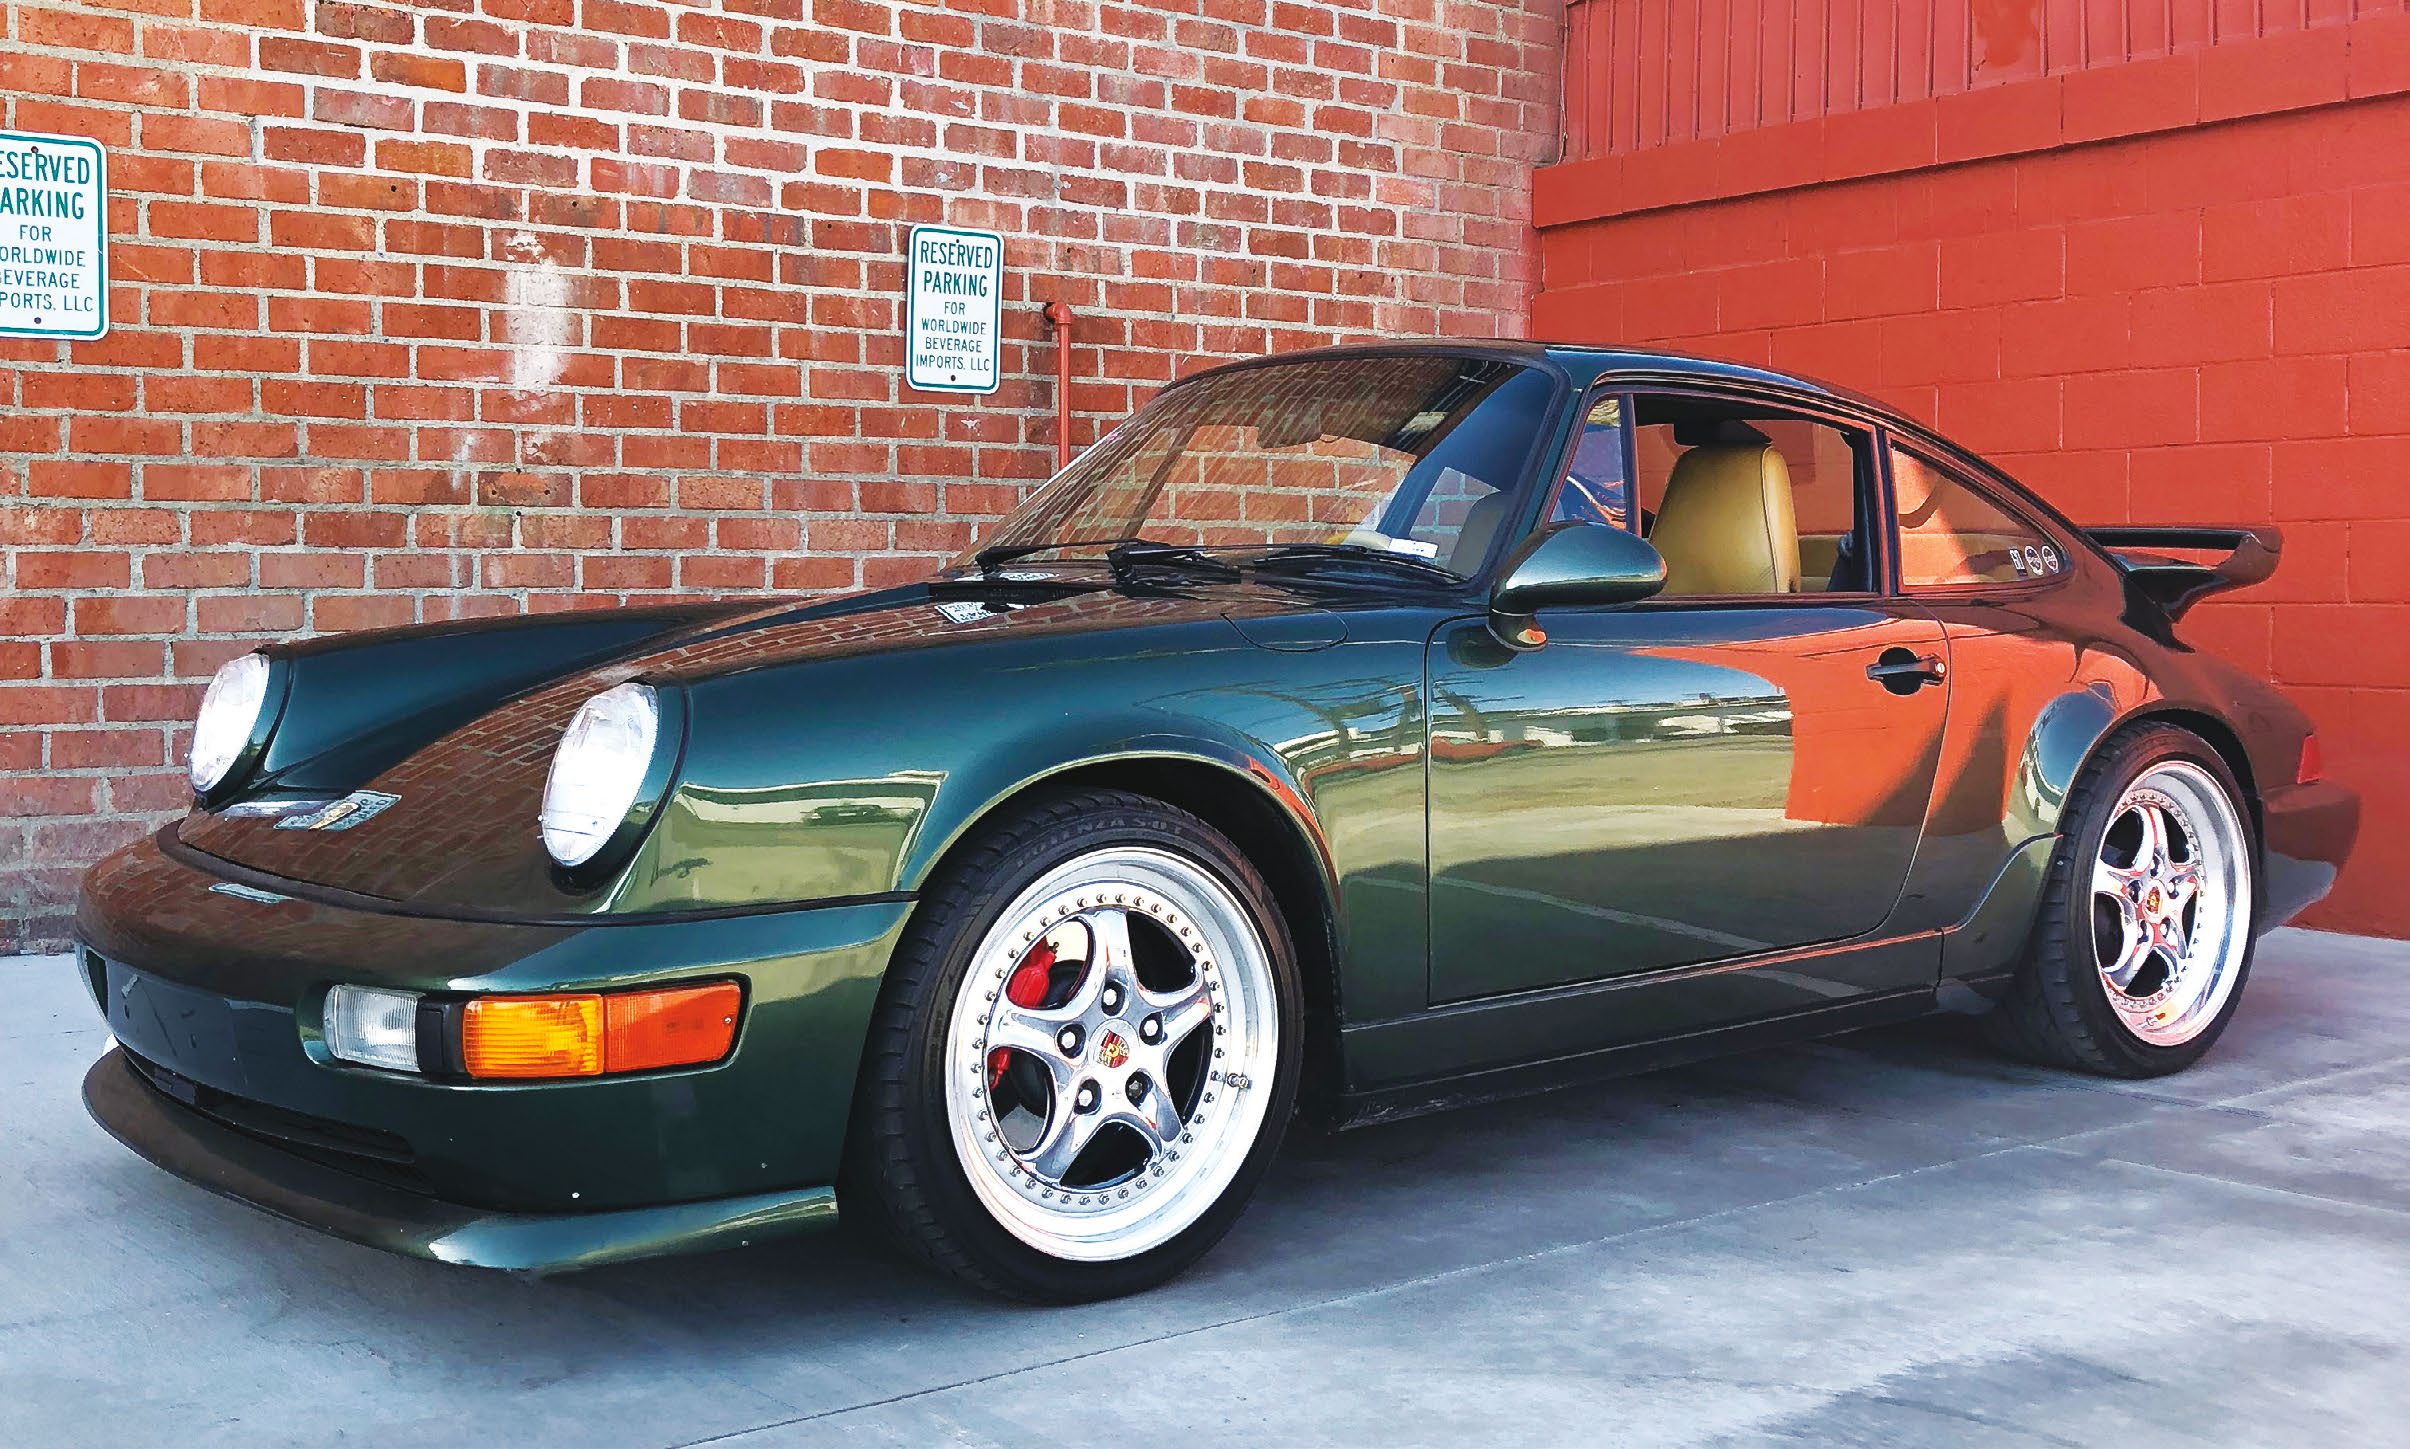 BEVERLY HILLS CAR CLUB | Total 911 Issue 201